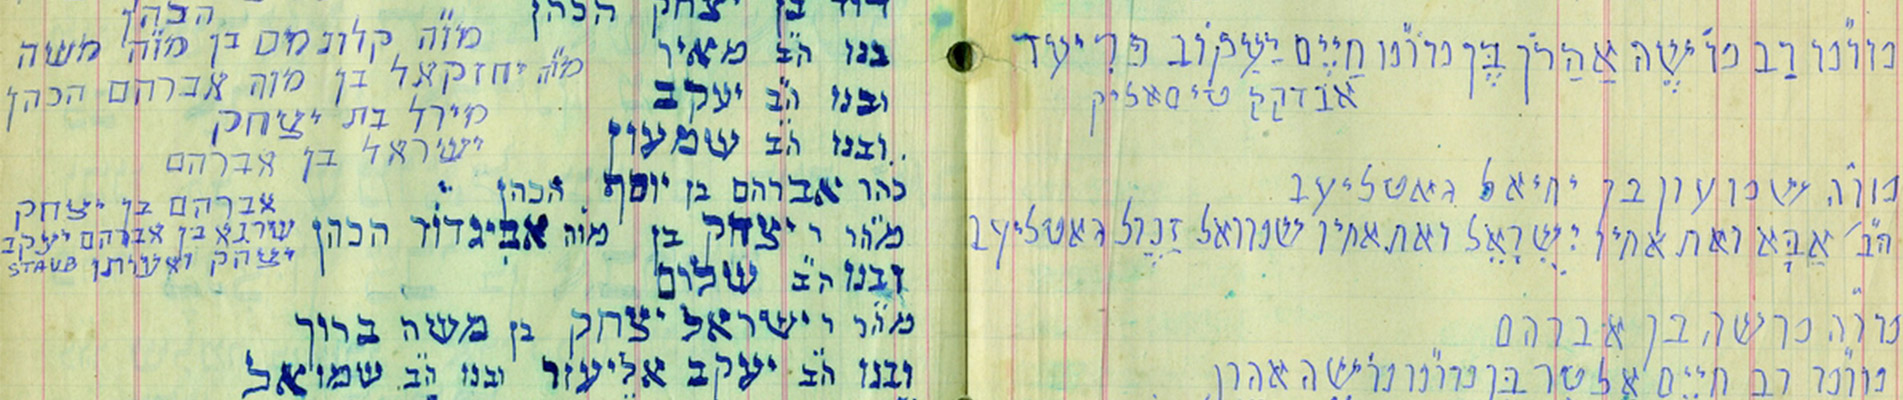 Hungarian Jewish Artifacts Saved from Auction Block